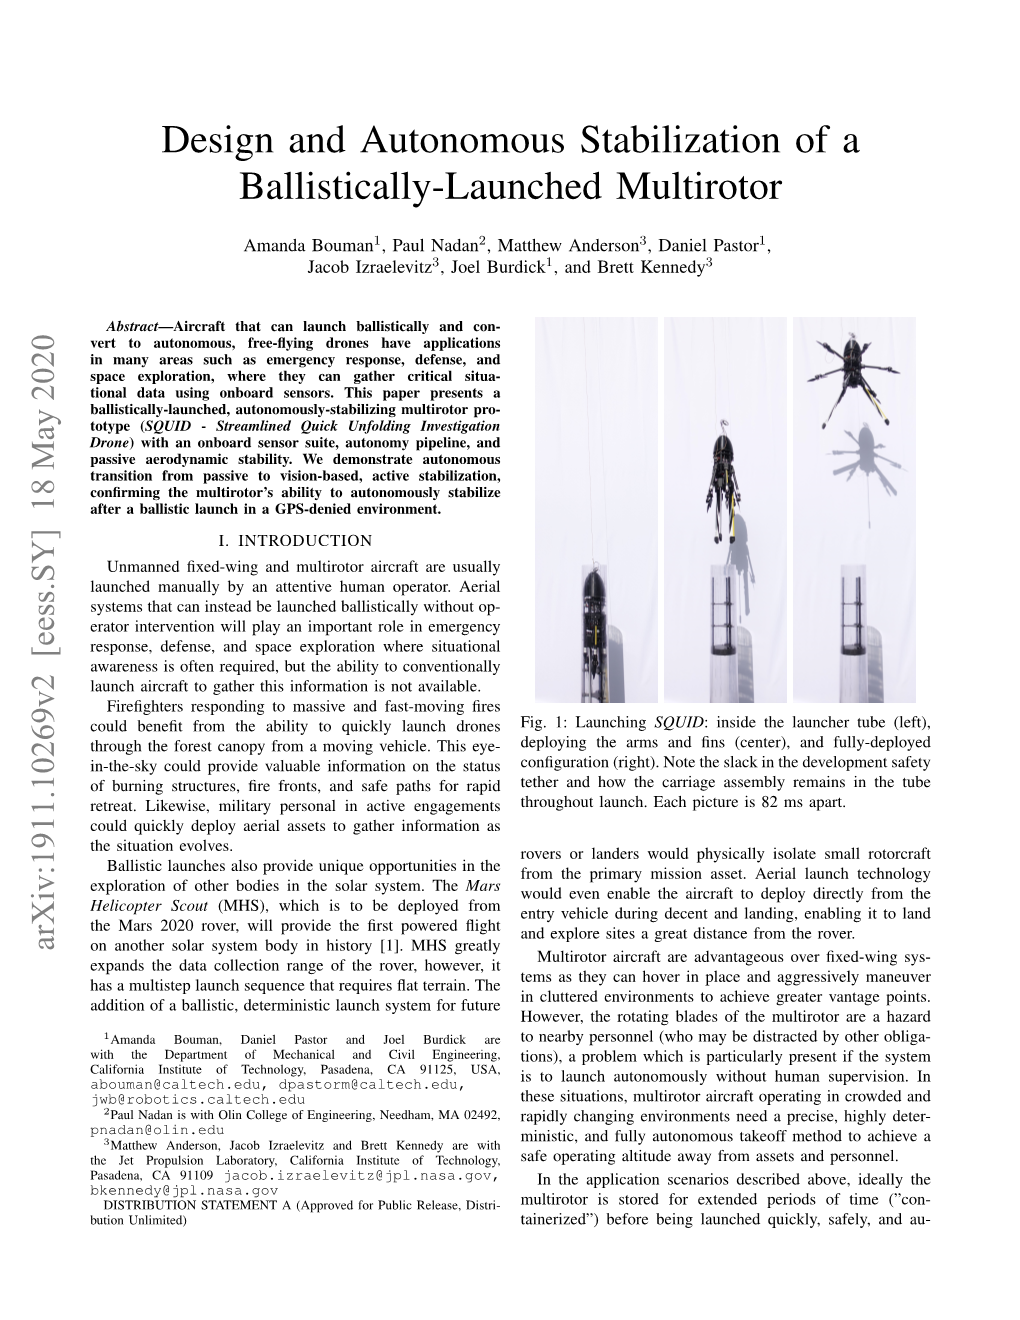 Design and Autonomous Stabilization of a Ballistically-Launched Multirotor